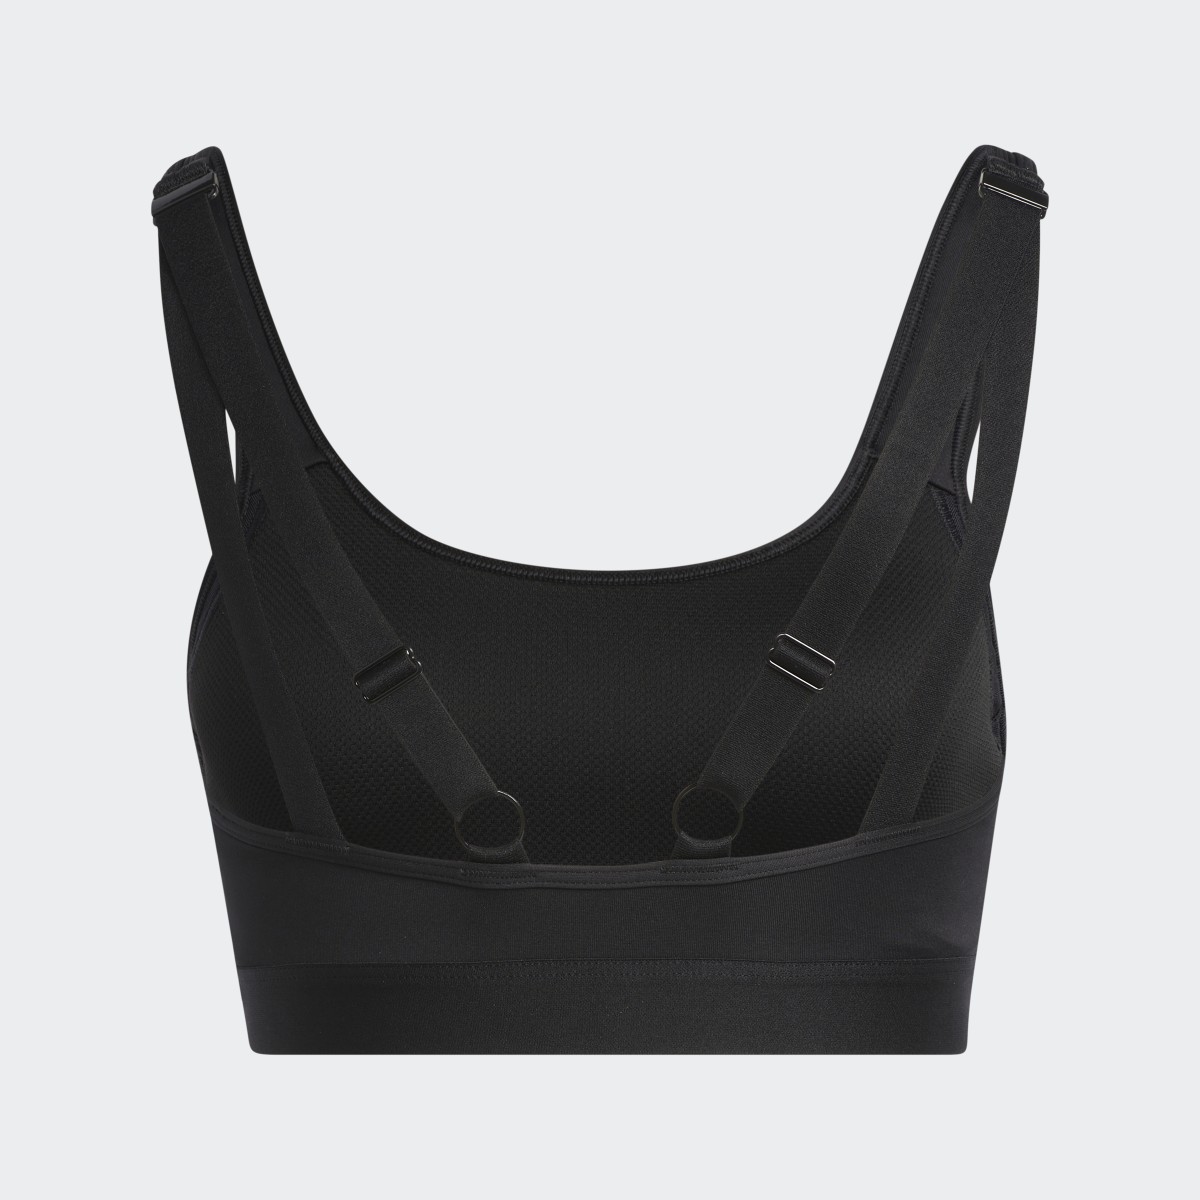 Adidas TLRD Move Training High-Support Bra. 7